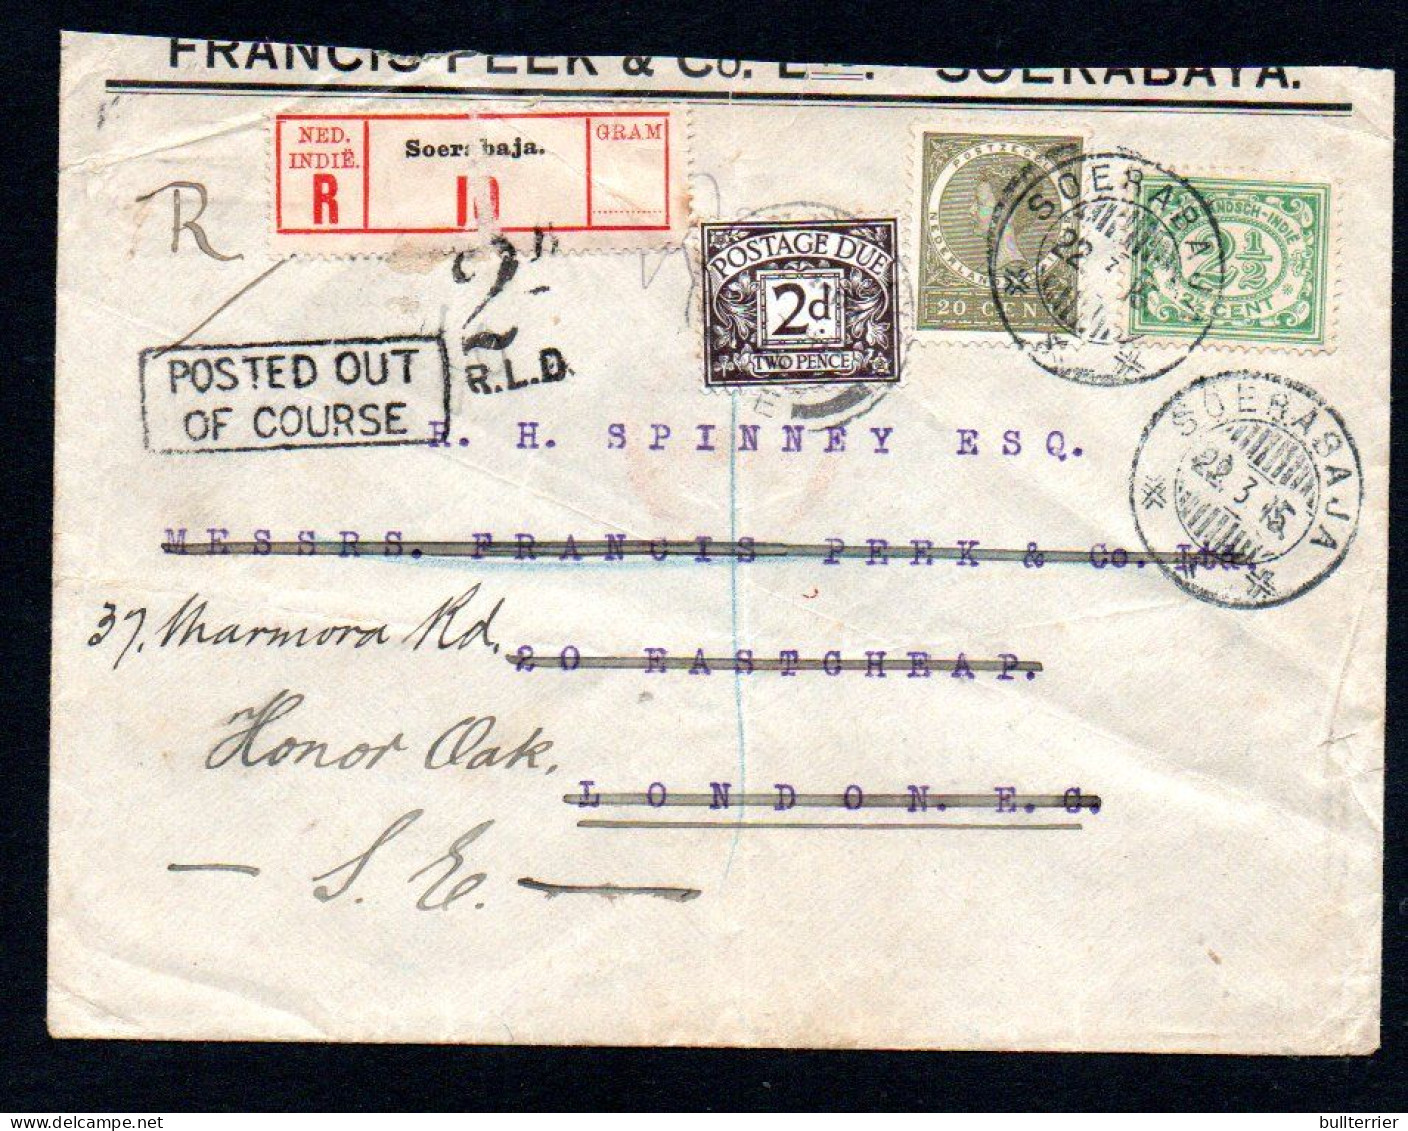 NETHERLANDS INDIES -1915 - REGITERED COVER TO LONDON ,POSTED OUT OF COURSE , POSTAGE DUE ADDED AND REDIRECTED, - Nederlands-Indië